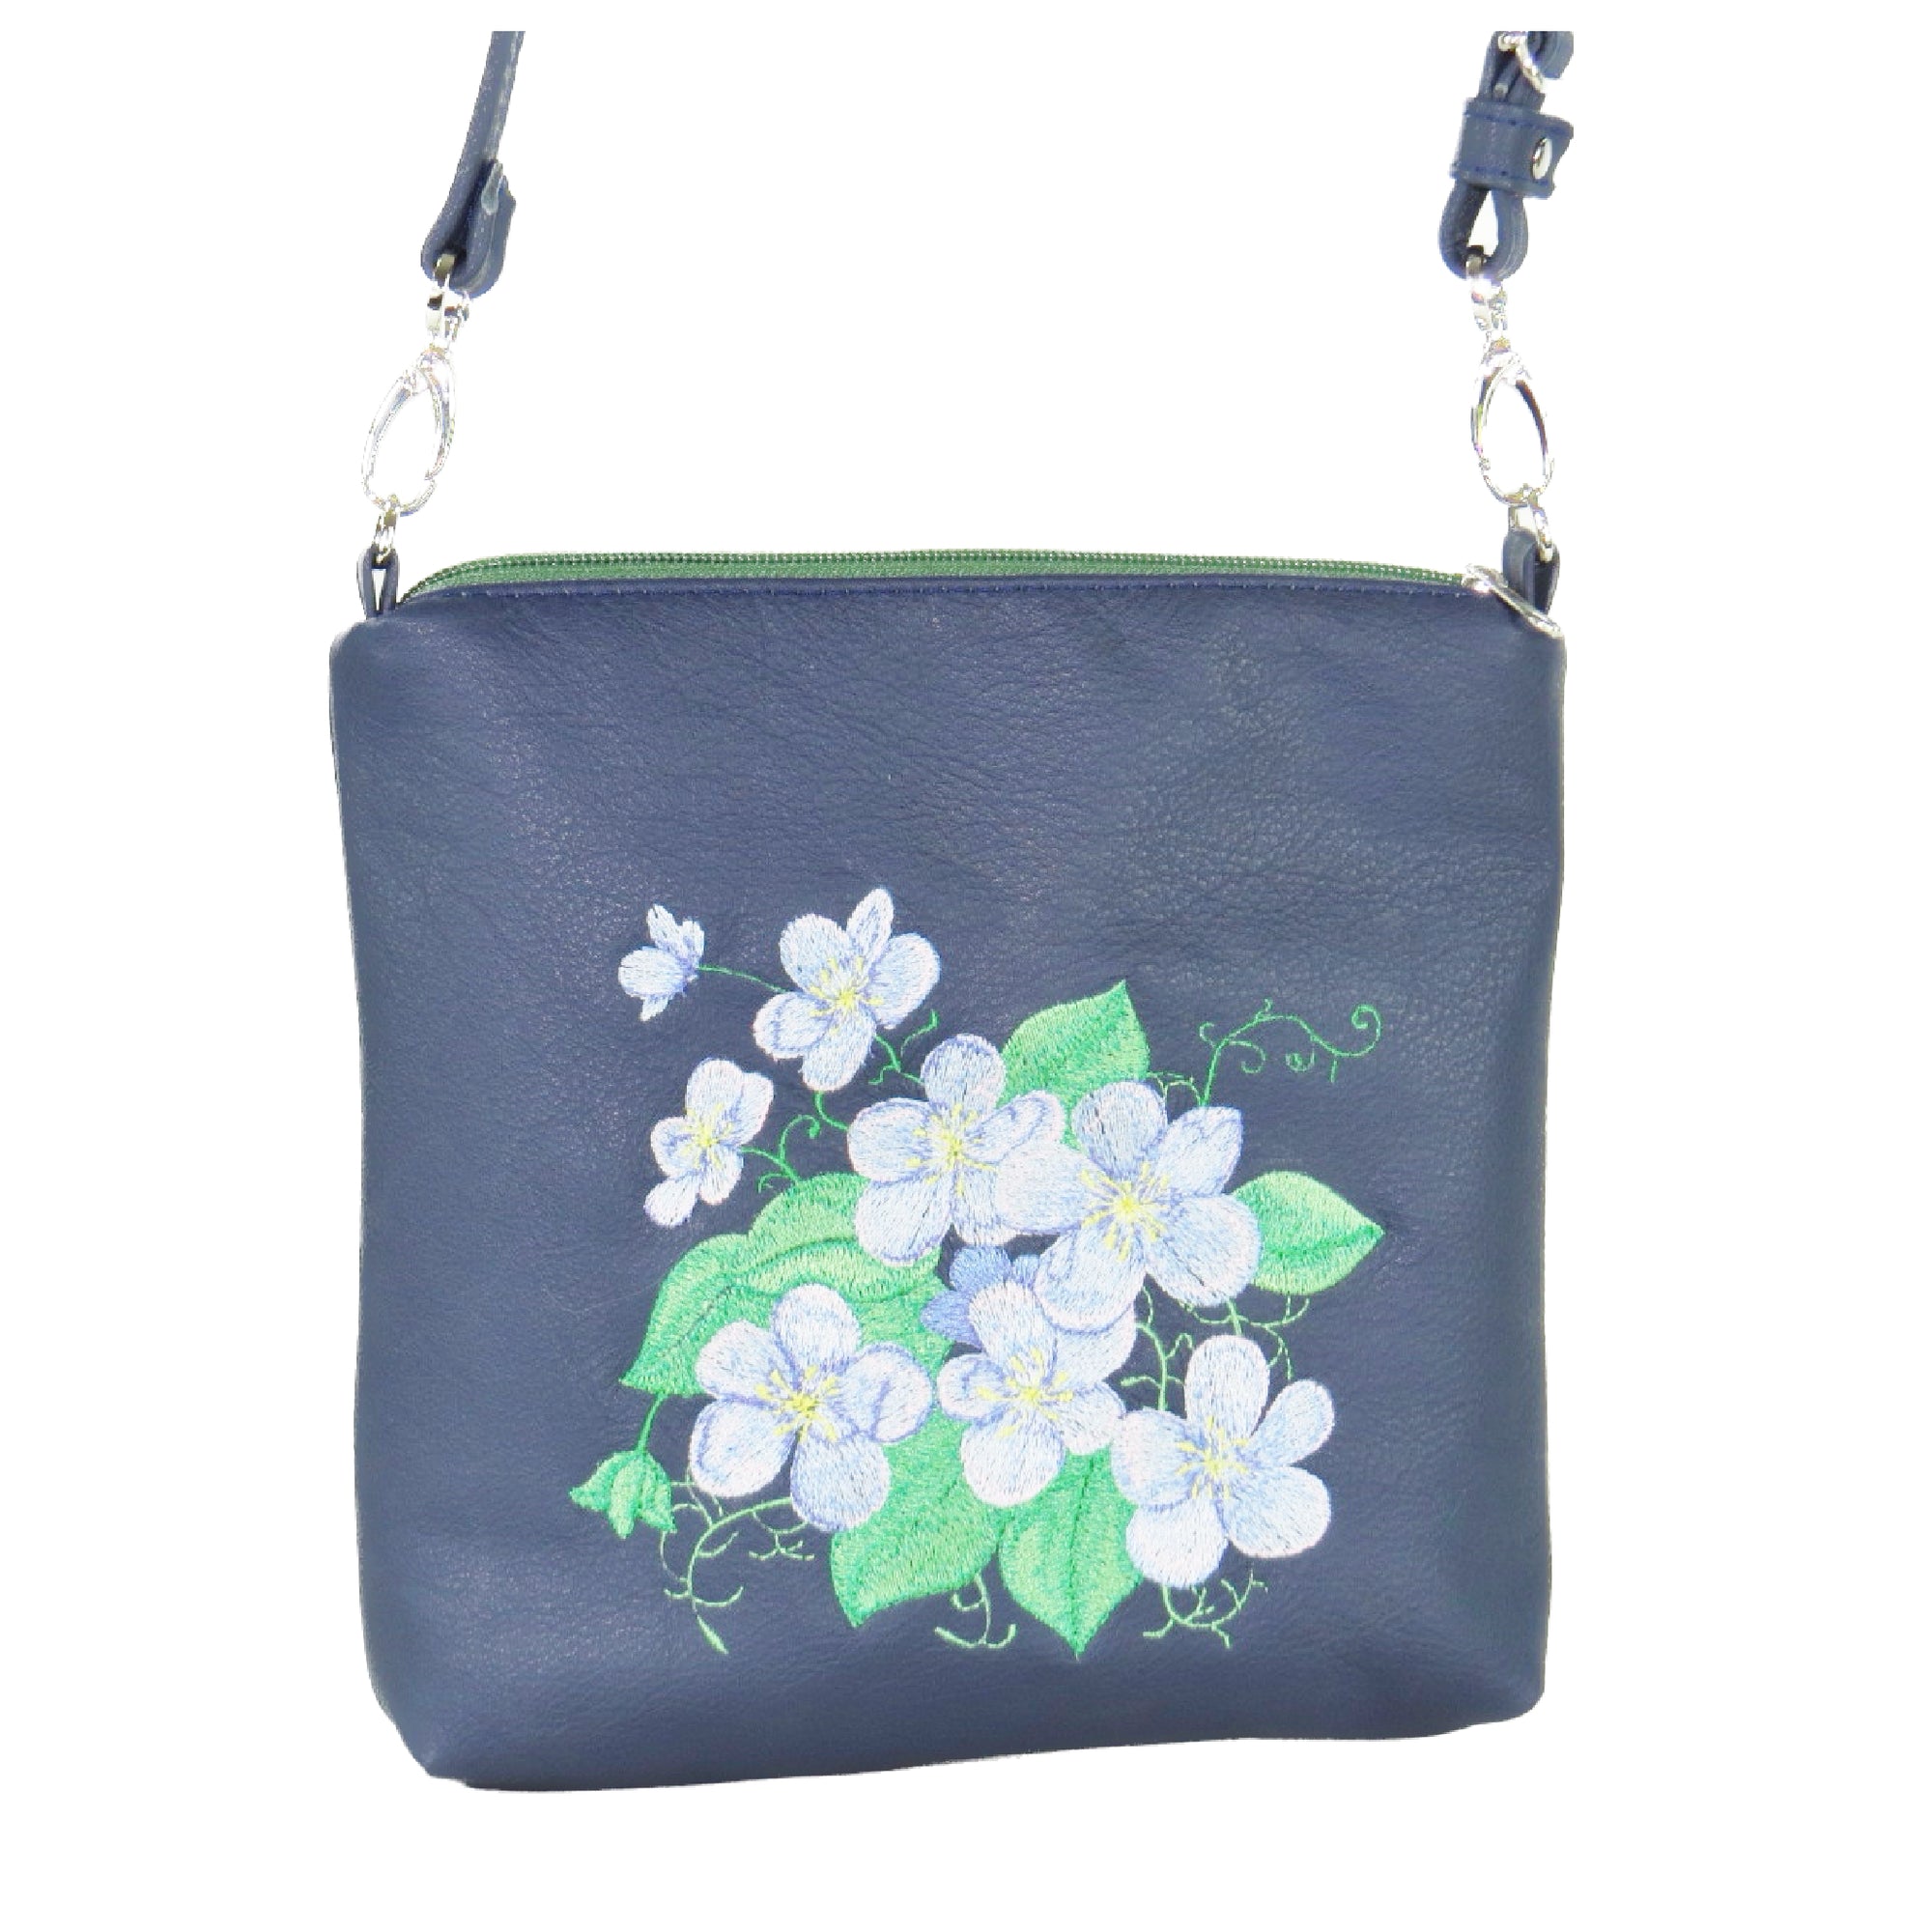 Navy Blue Leather Embroidered Forget-Me-Not Bouquet Crossbody Bag